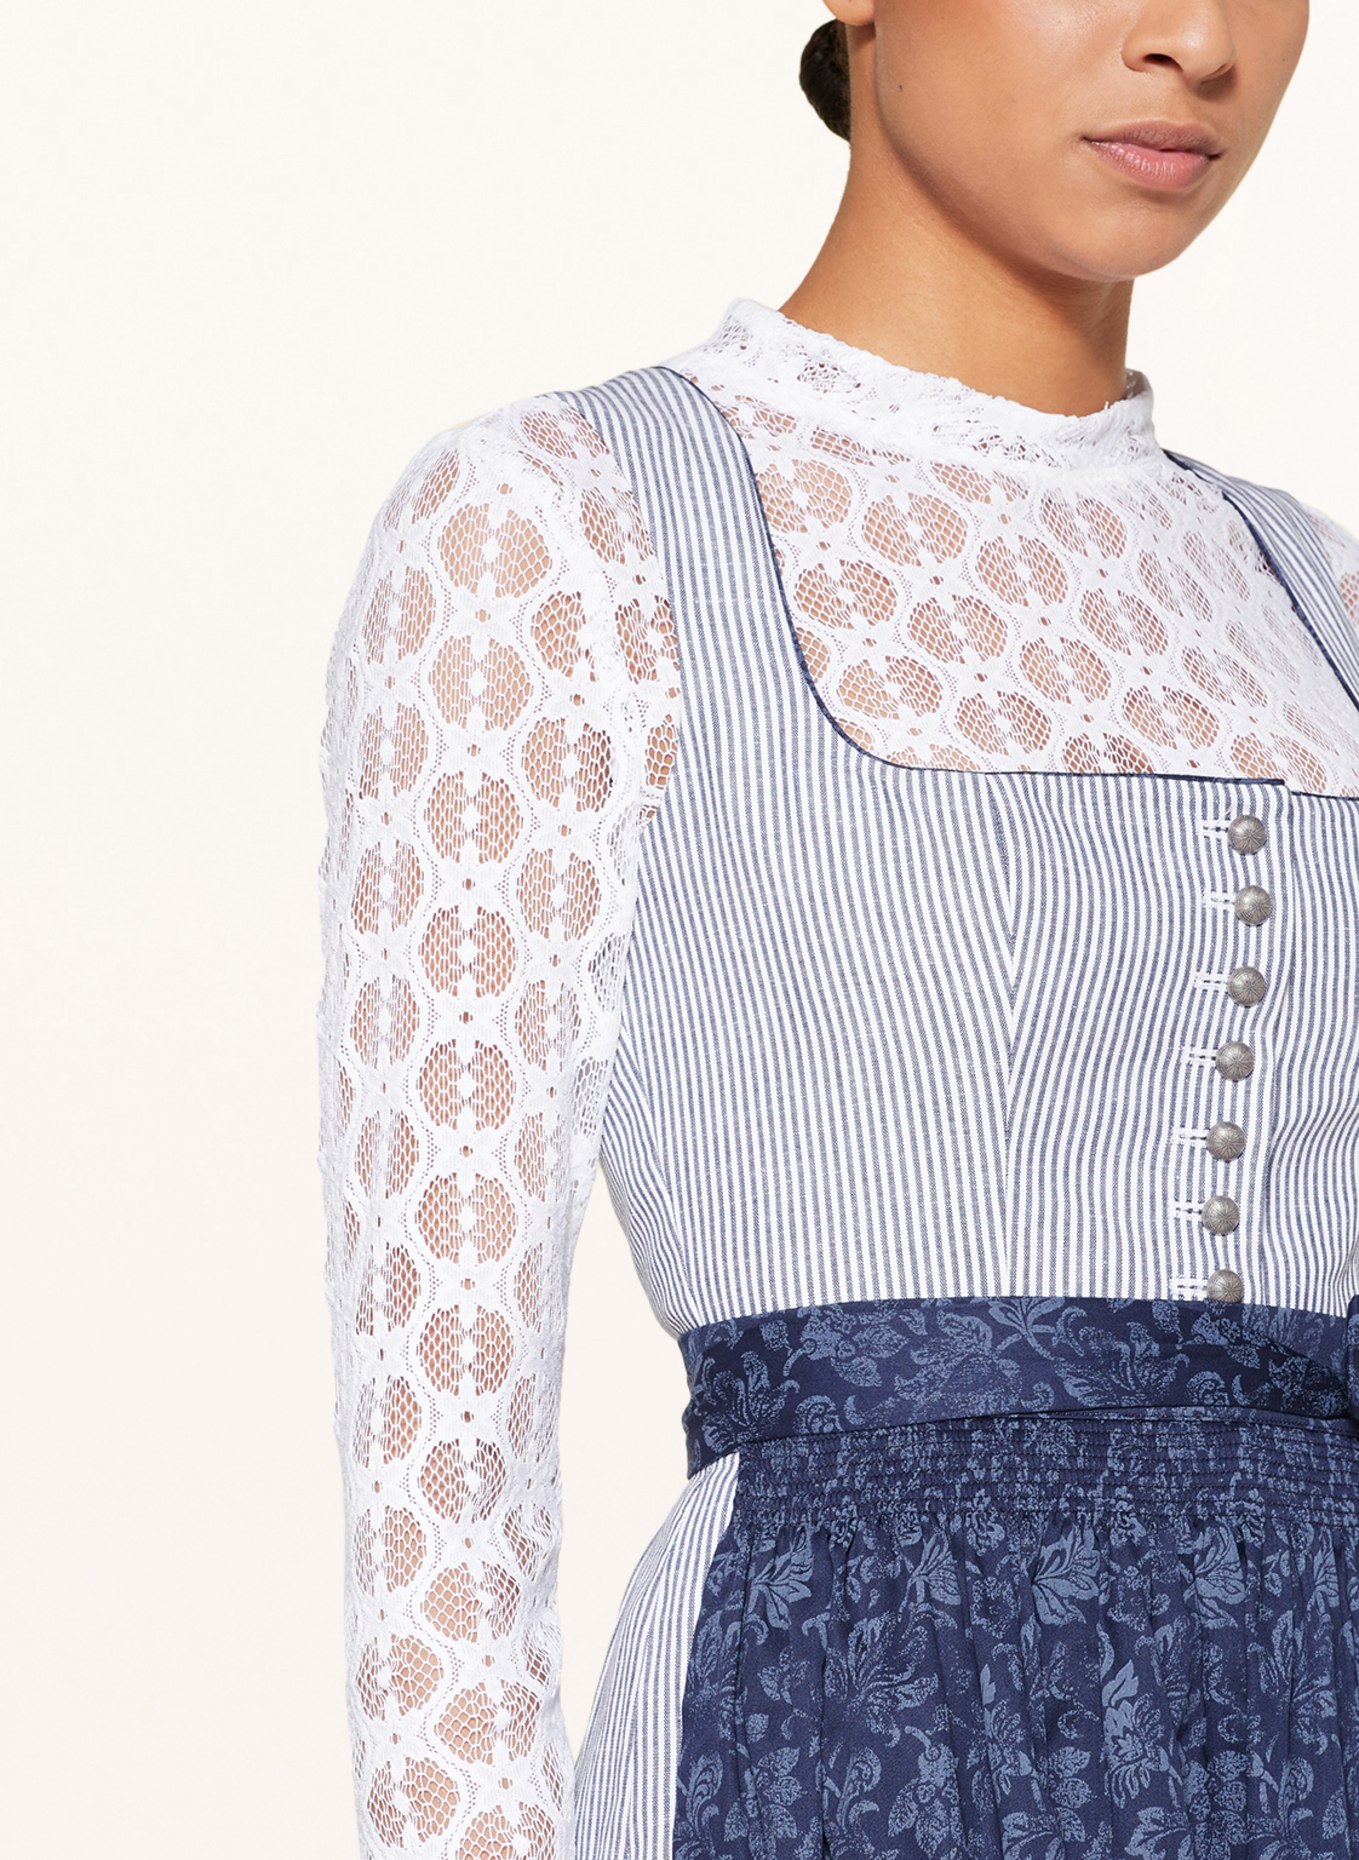 BERWIN & WOLFF Dirndl blouse made of lace, Color: WHITE (Image 3)